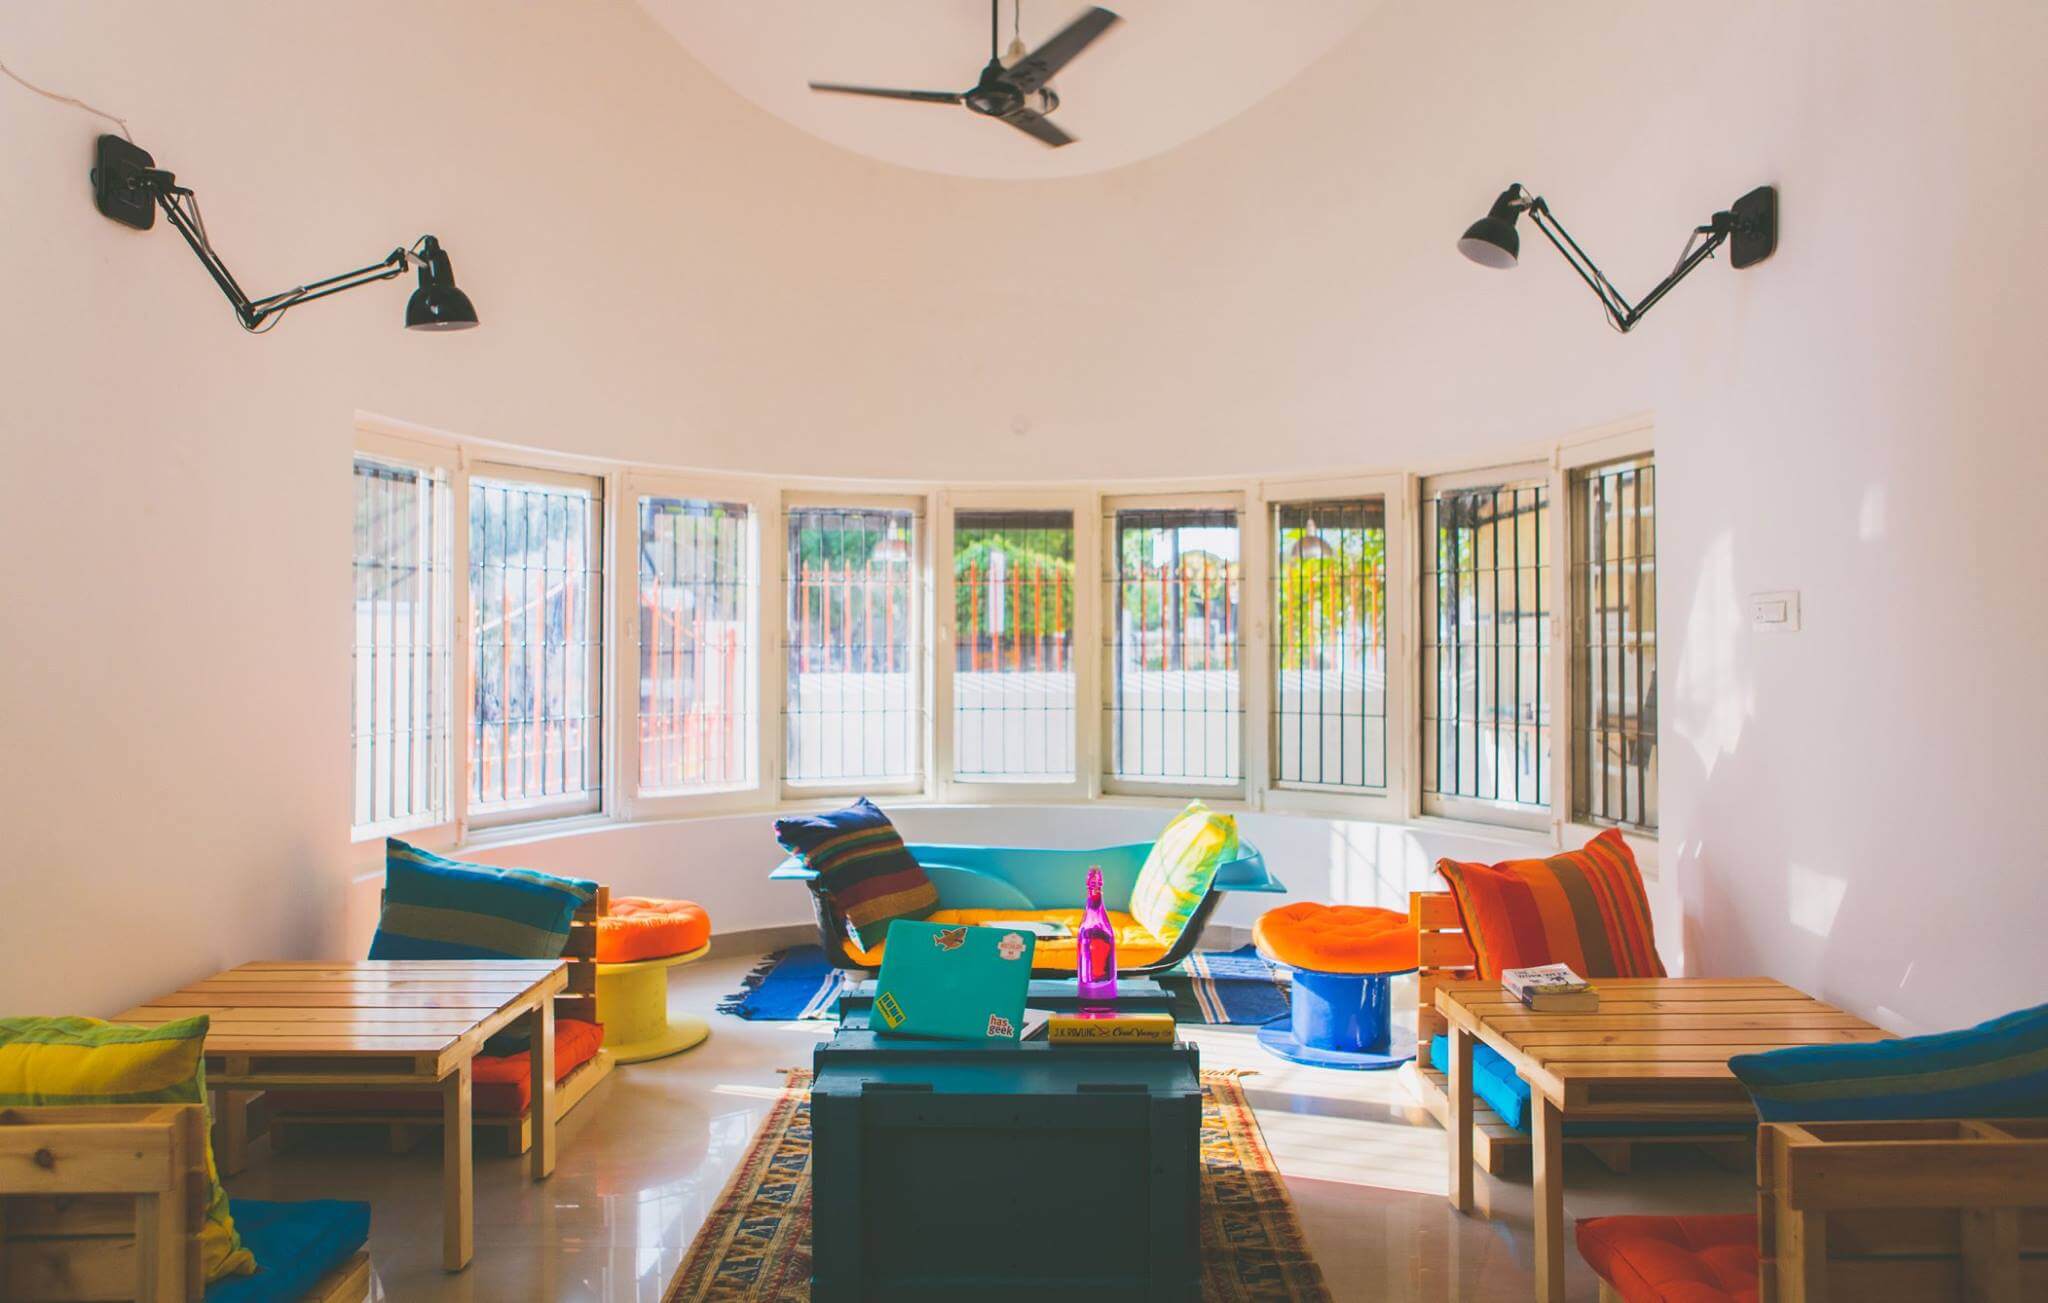 10 Budget Friendly Hostels in India to Plan an Affordable Backpacking Trip